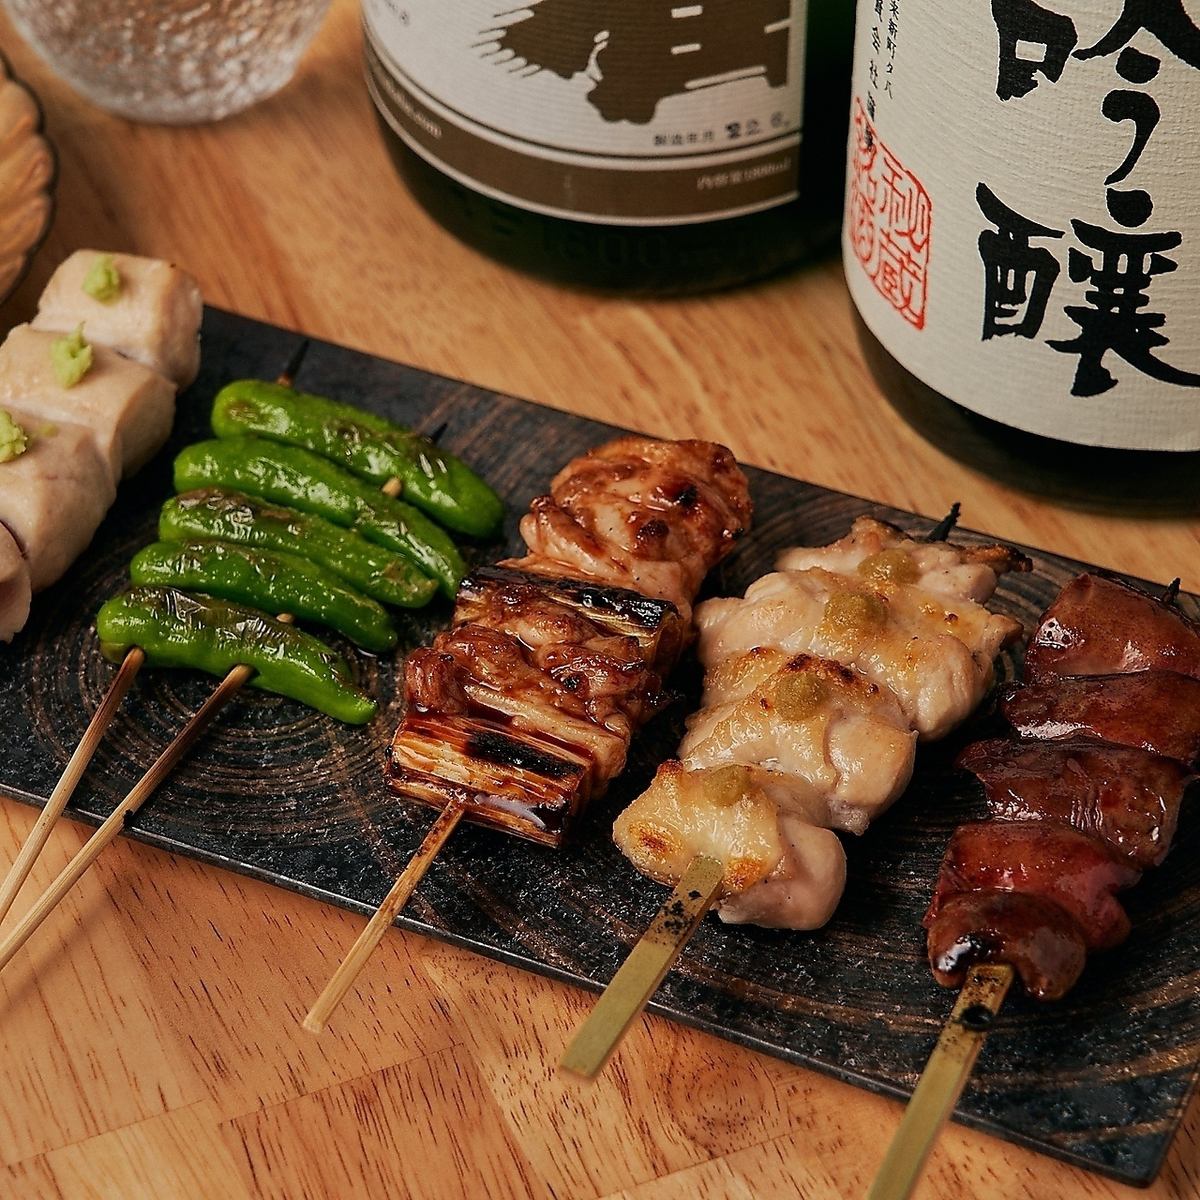 Be sure to enjoy our yakitori, which is made with great care, from how it's grilled, how it's cut, to how it's skewered.